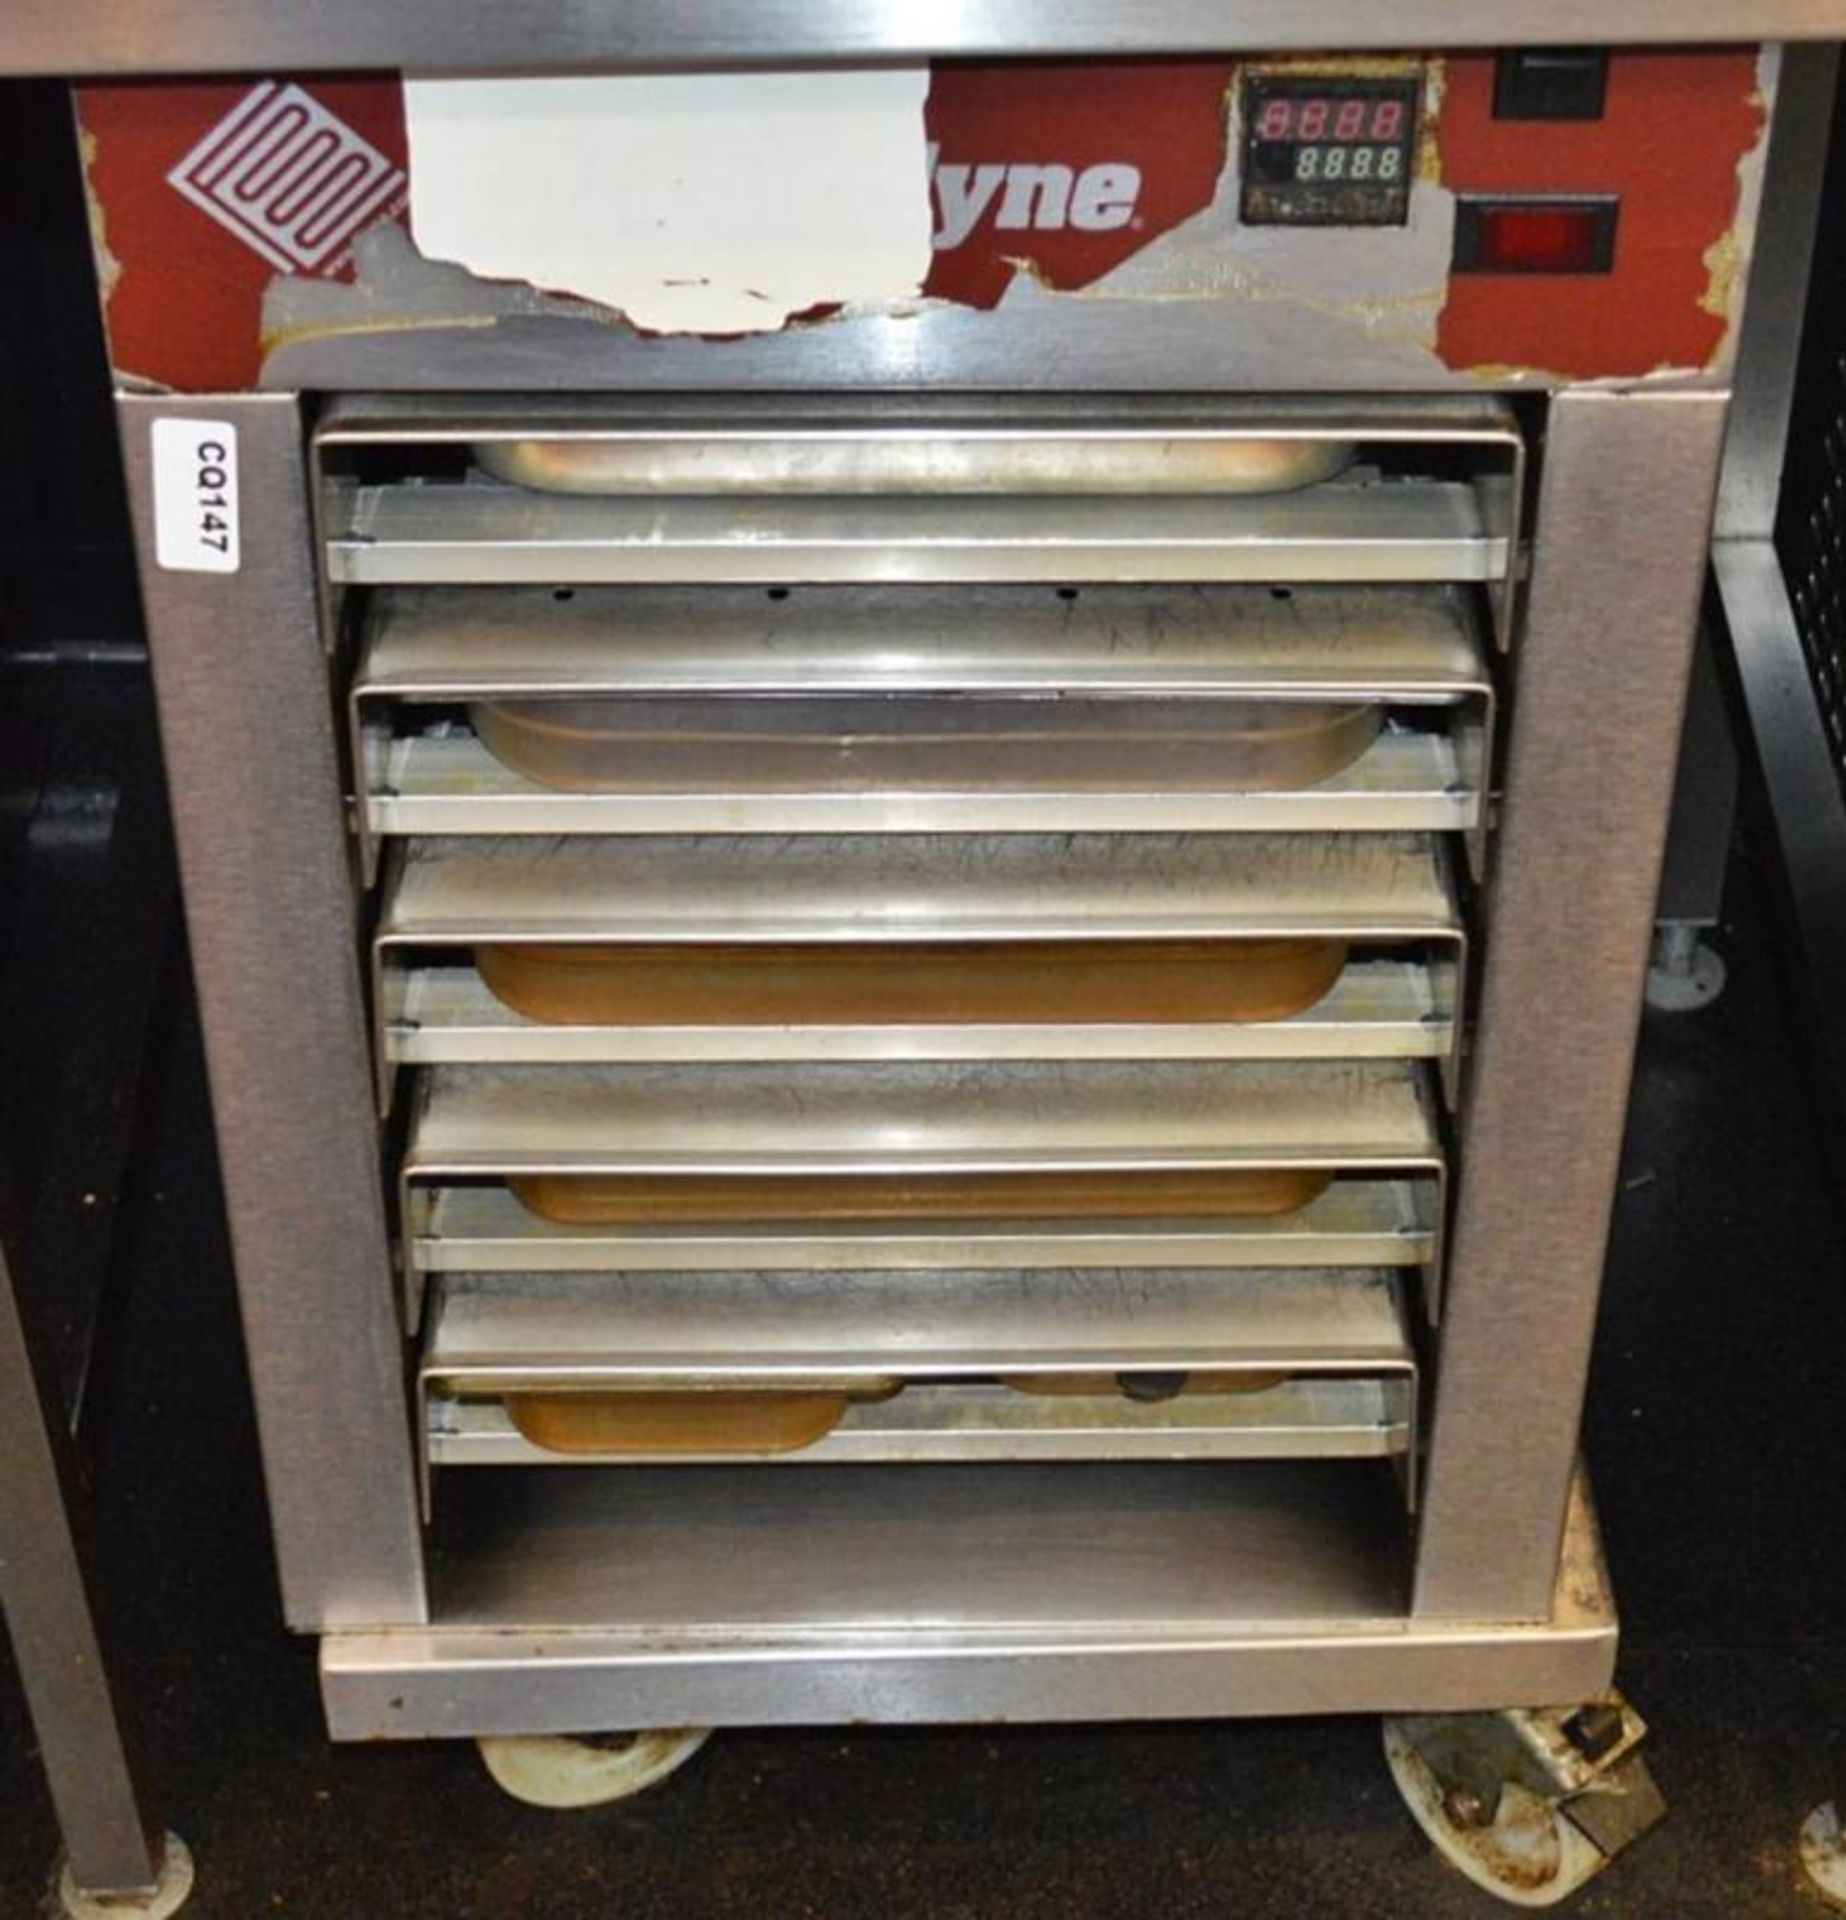 1 x Thermodyne Cook and Hold Food Warmer - H77 x W50 x D66 cms - Ref CQ147 - CL363 - Location: Steve